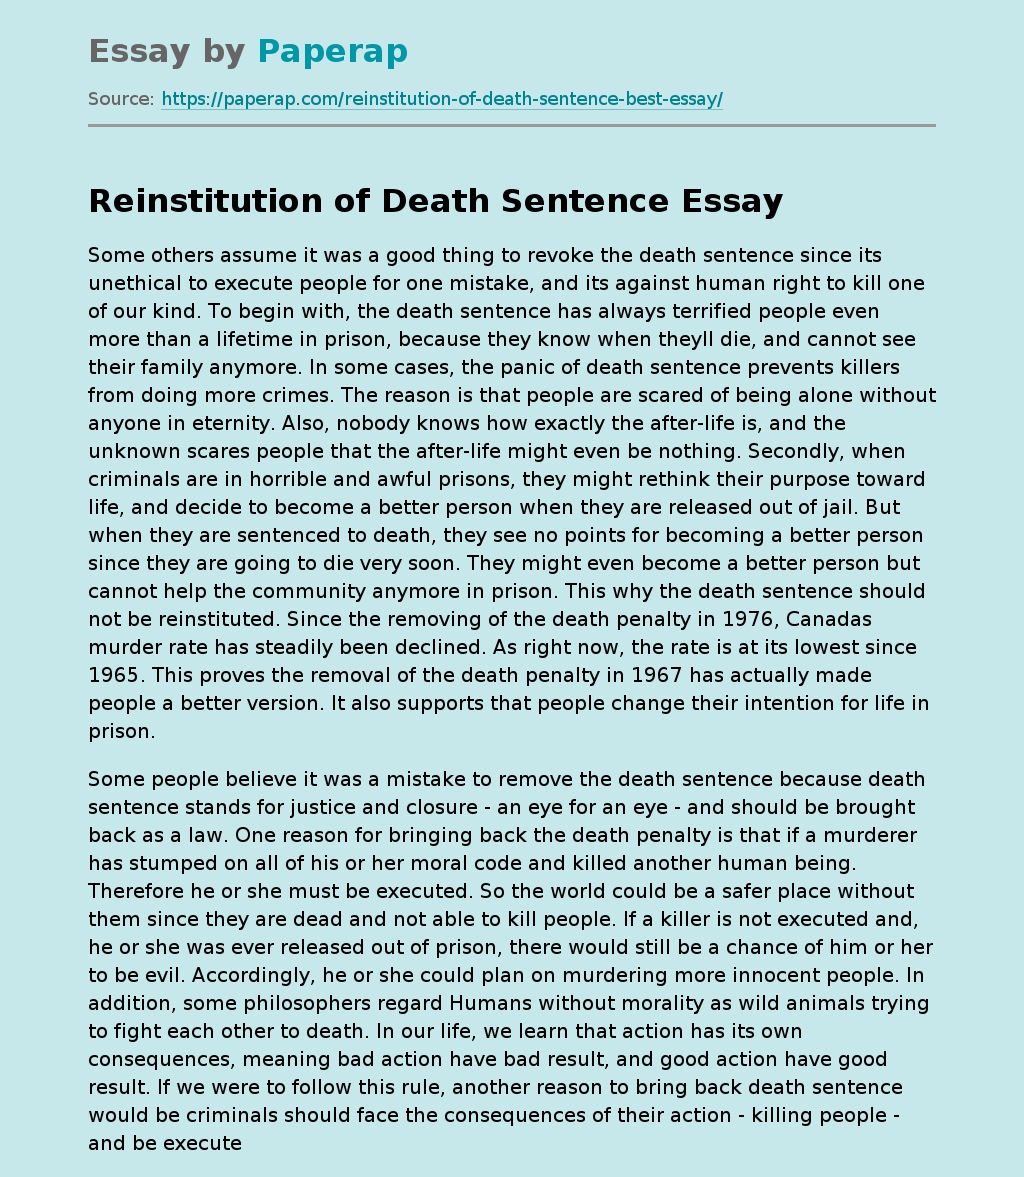 Reinstitution of Death Sentence: Pros and Cons